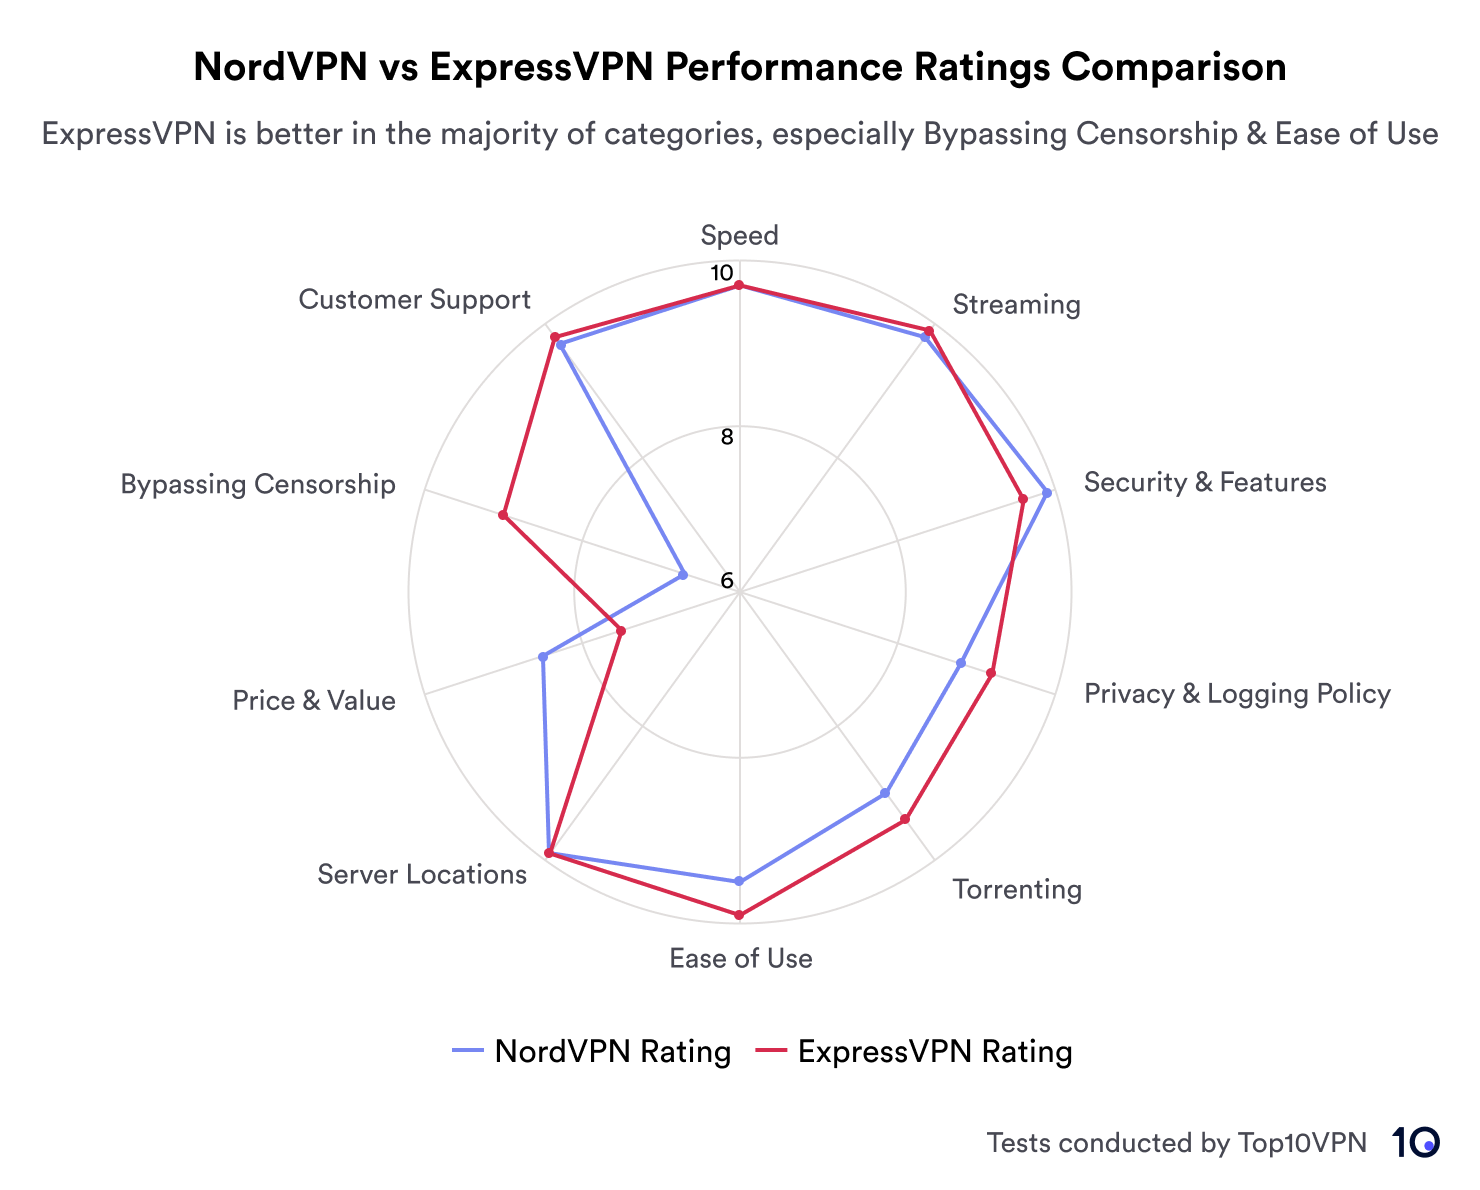 Radar chart shows ExpressVPN often outscoring NordVPN in categories such as streaming and privacy & logging policy.